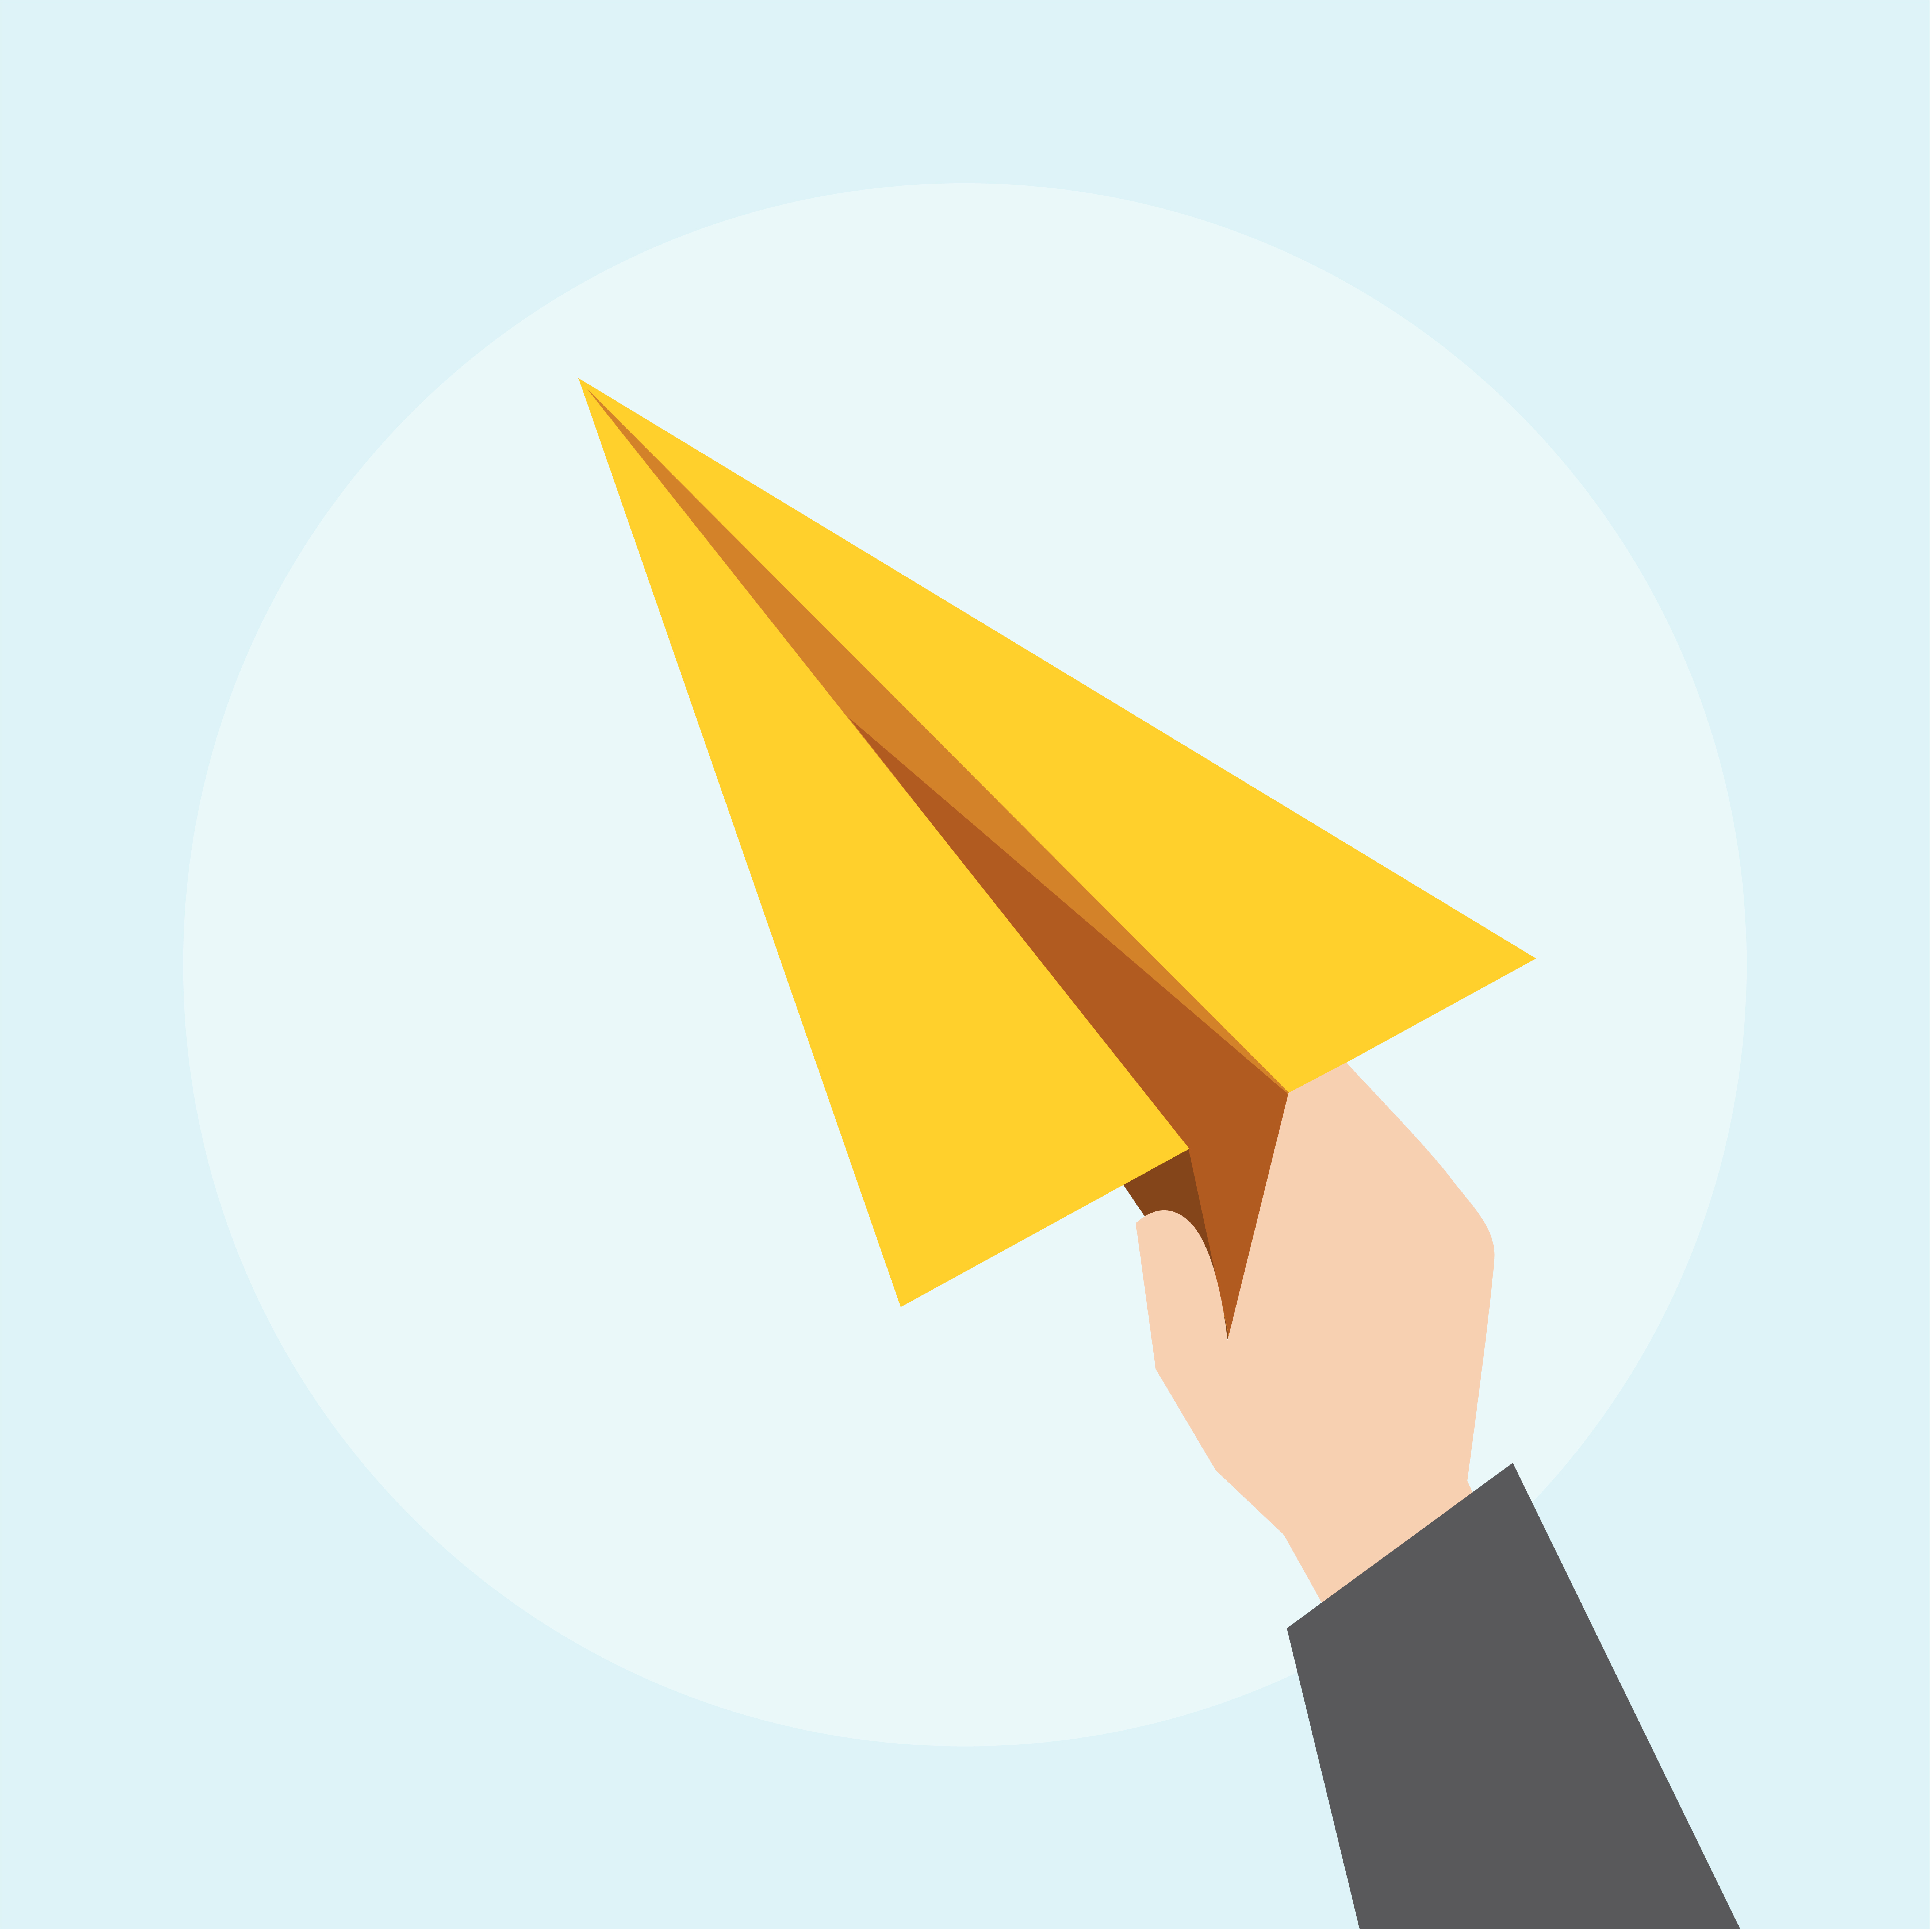 Download Illustration of paper plane icon - Download Free Vectors ...